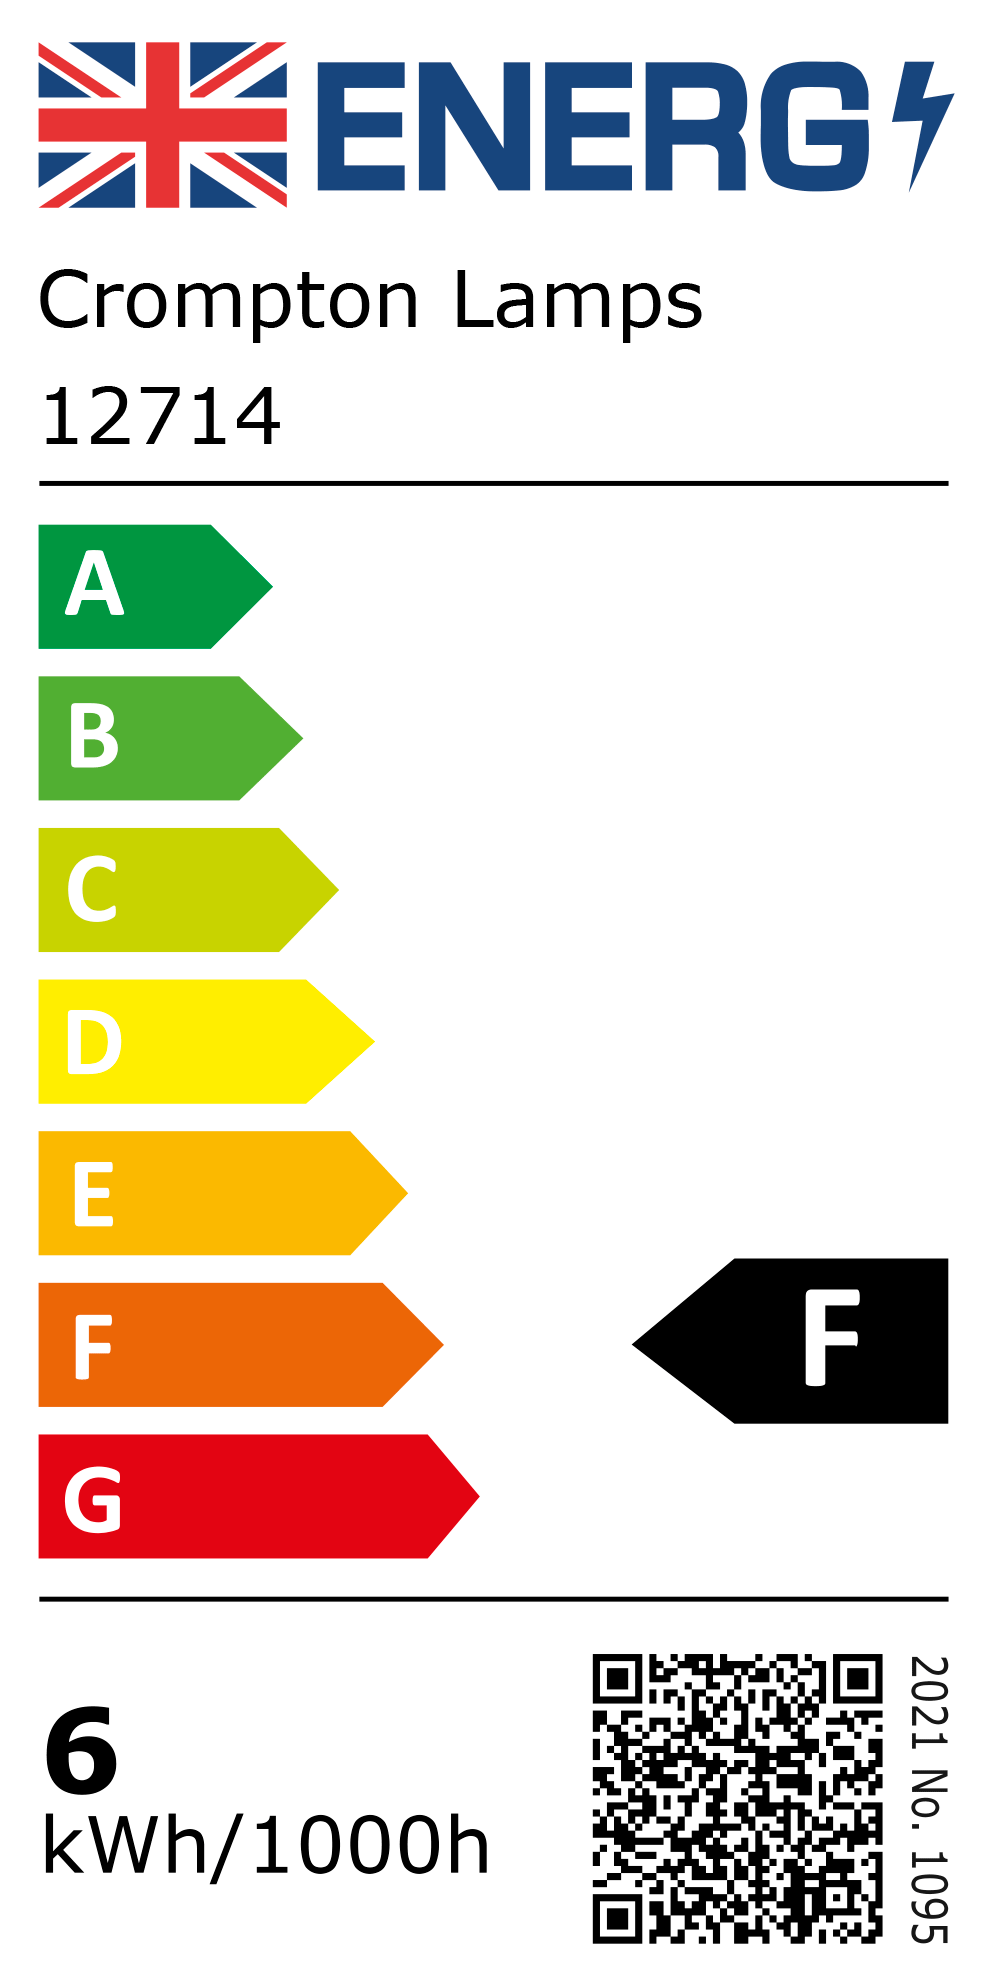 New 2021 Energy Rating Label: Stock Code 12714